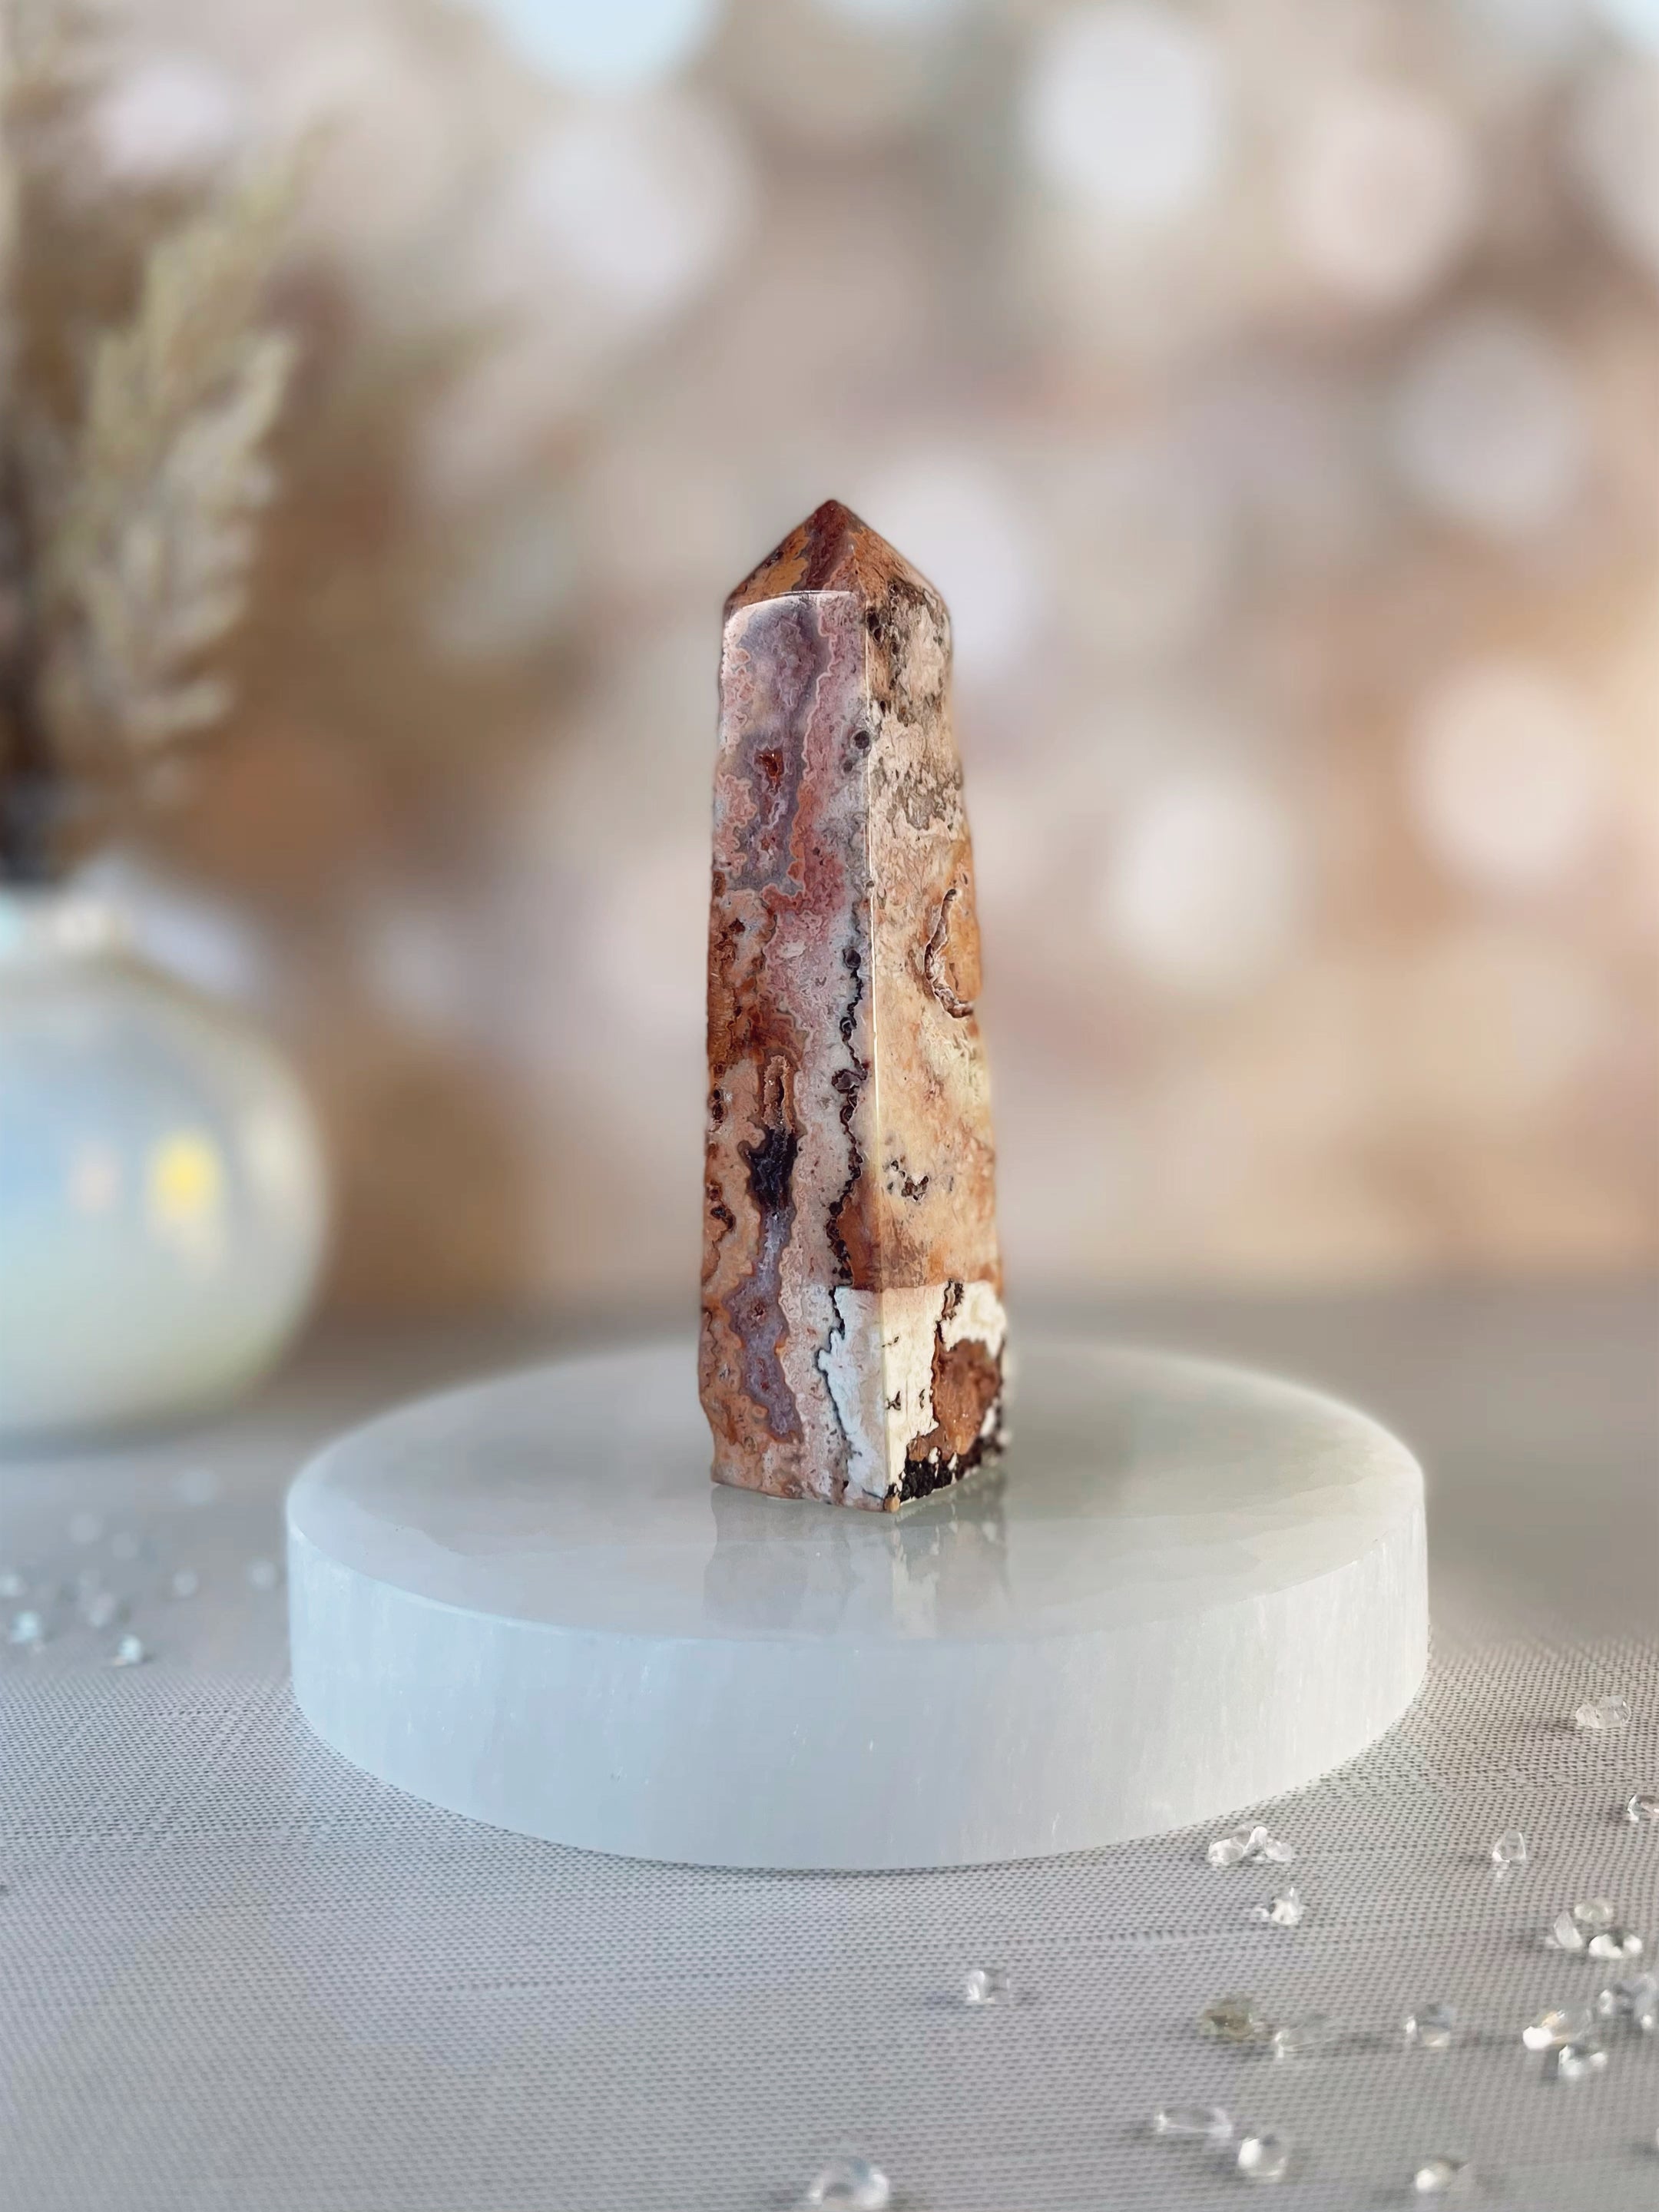 Crazy Lace Agate Tower #4